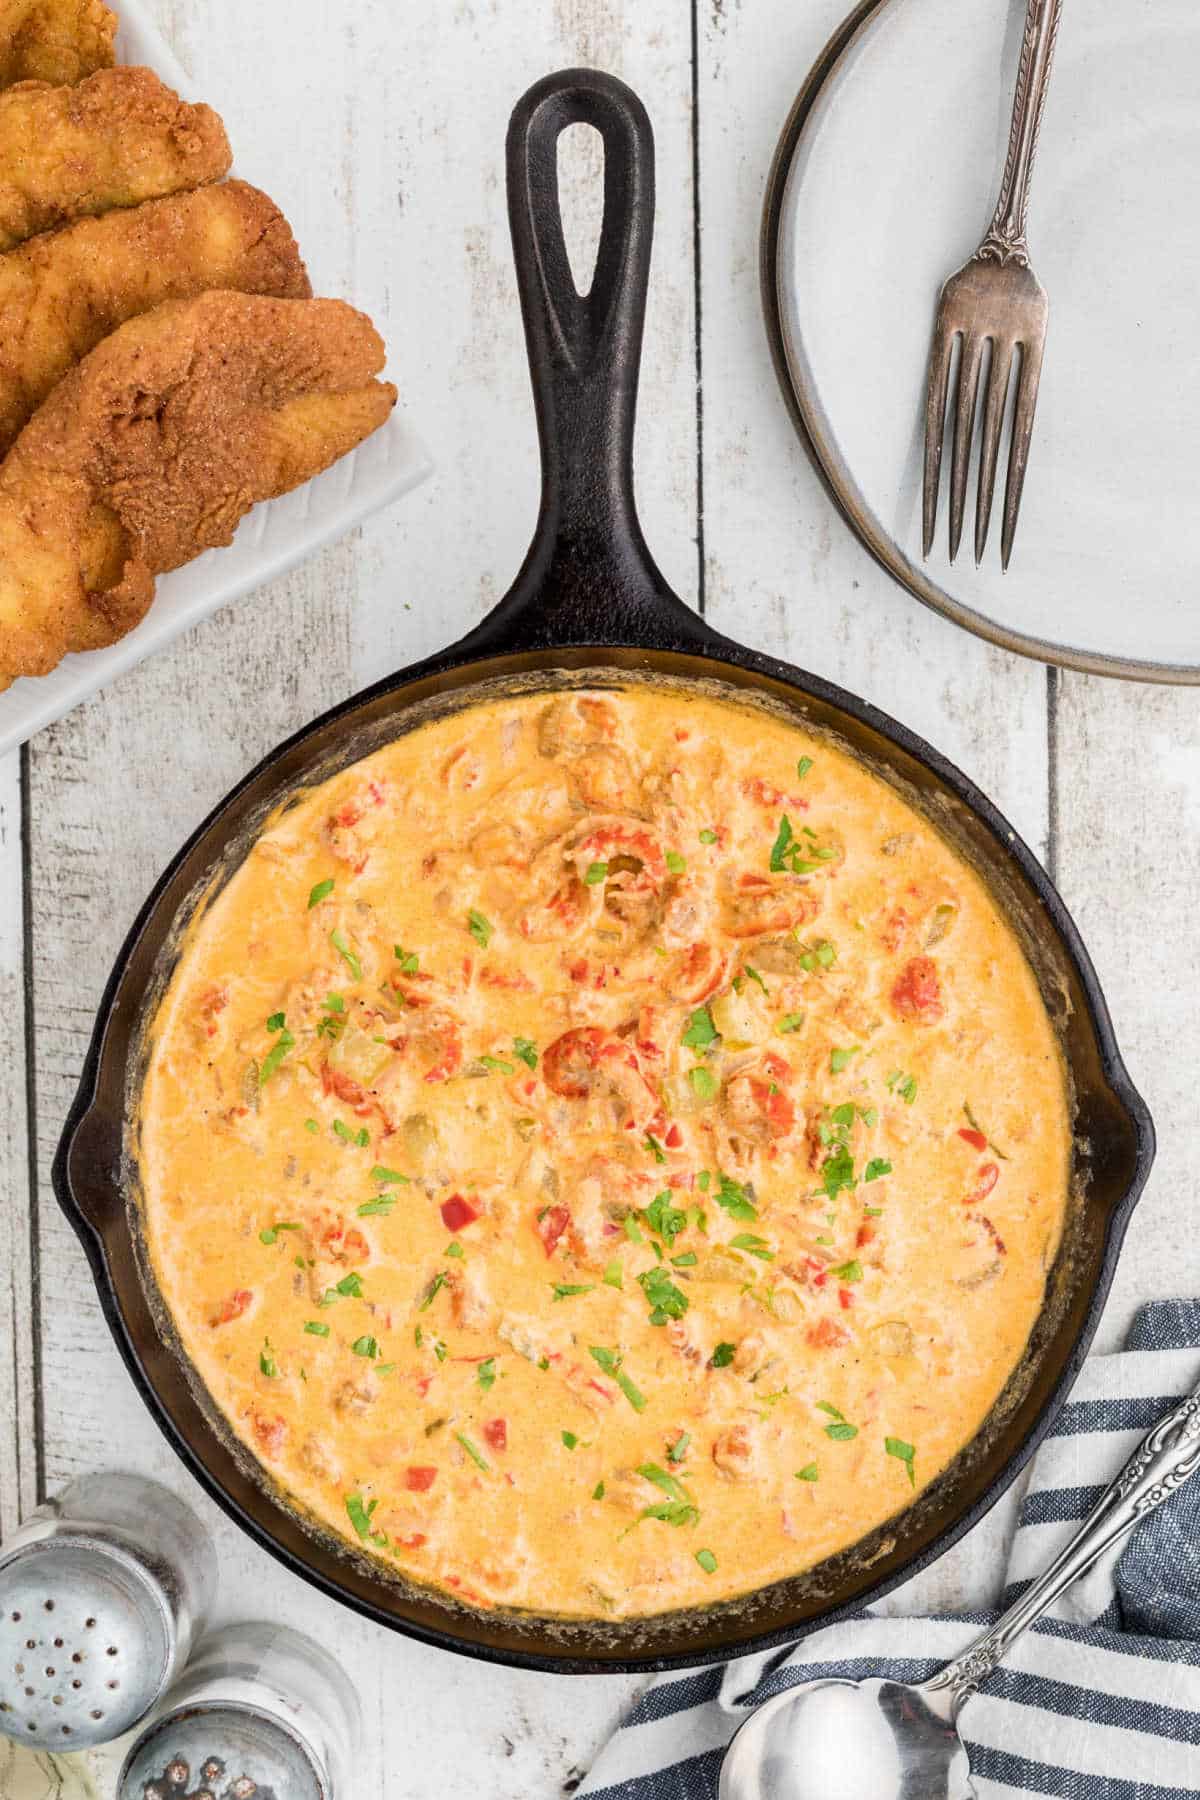 Overhead view of a crawfish sauce in a cast iron skillet.